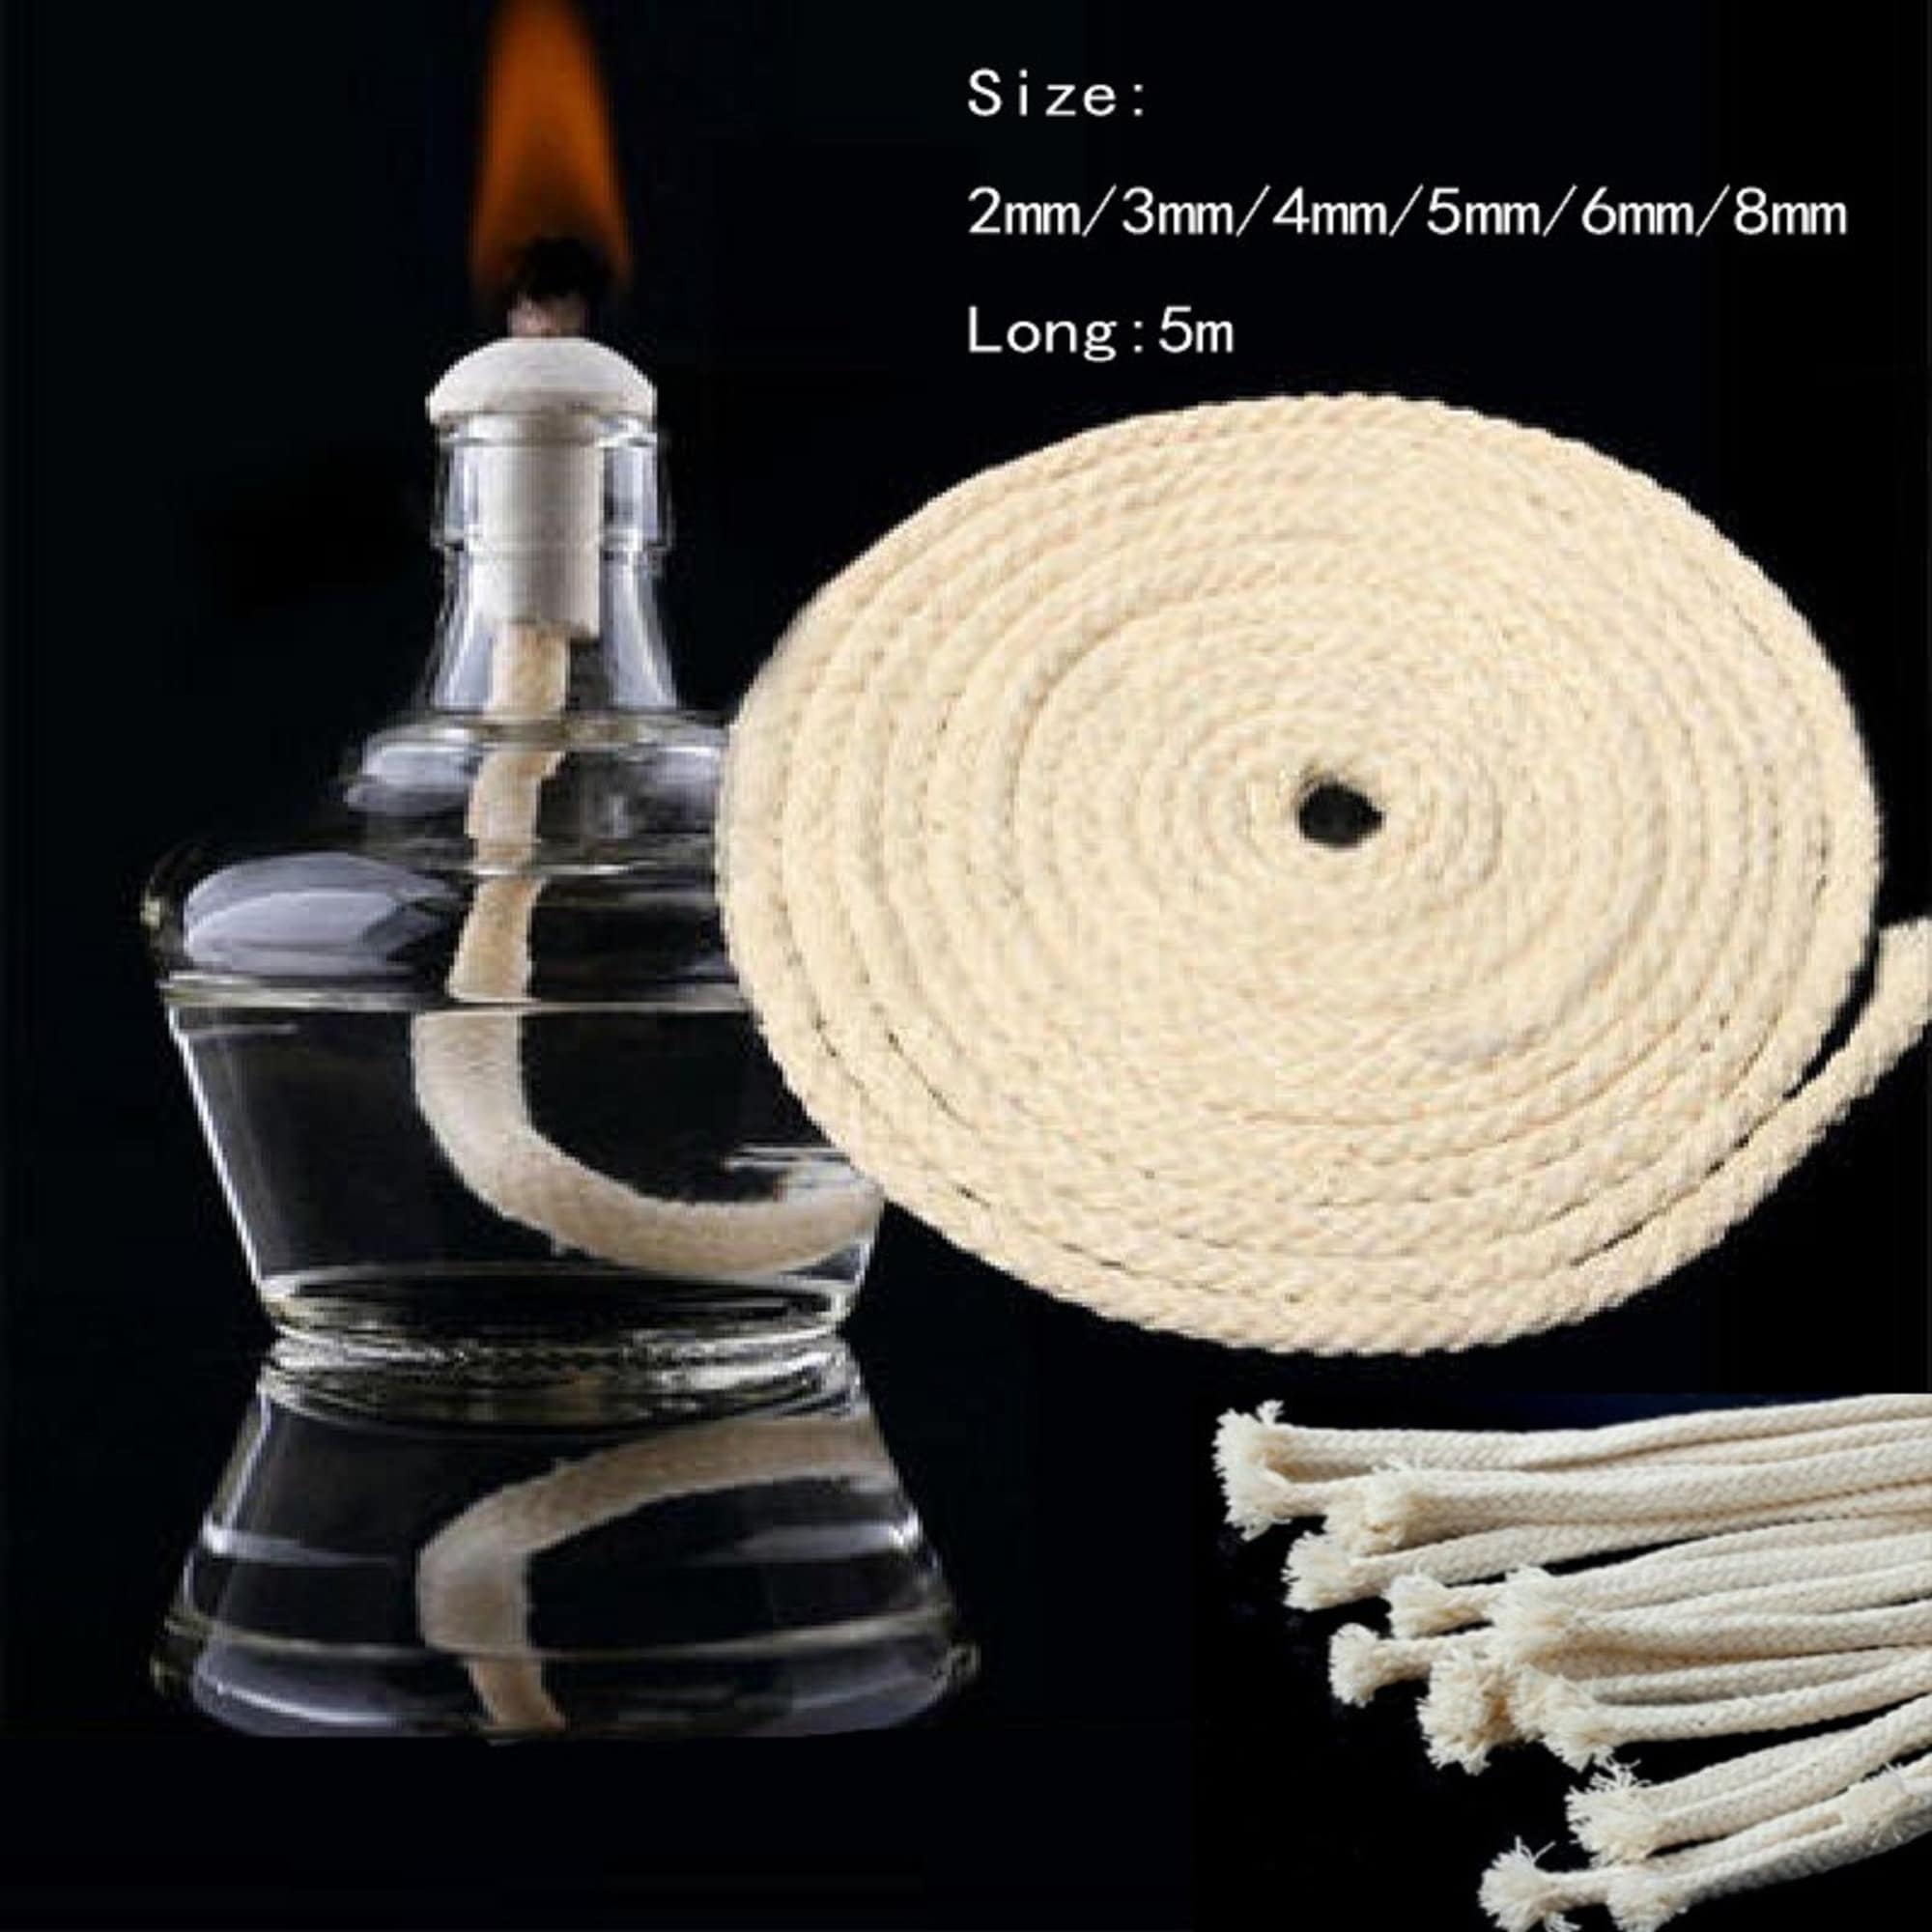 1/4 Round Cotton Oil Lamp Wicks, Braided Cotton Replacement Wick for Kerosene  Oil Lamp and Oil Burners Lantern (20 Pcs, Not Included lamp) 